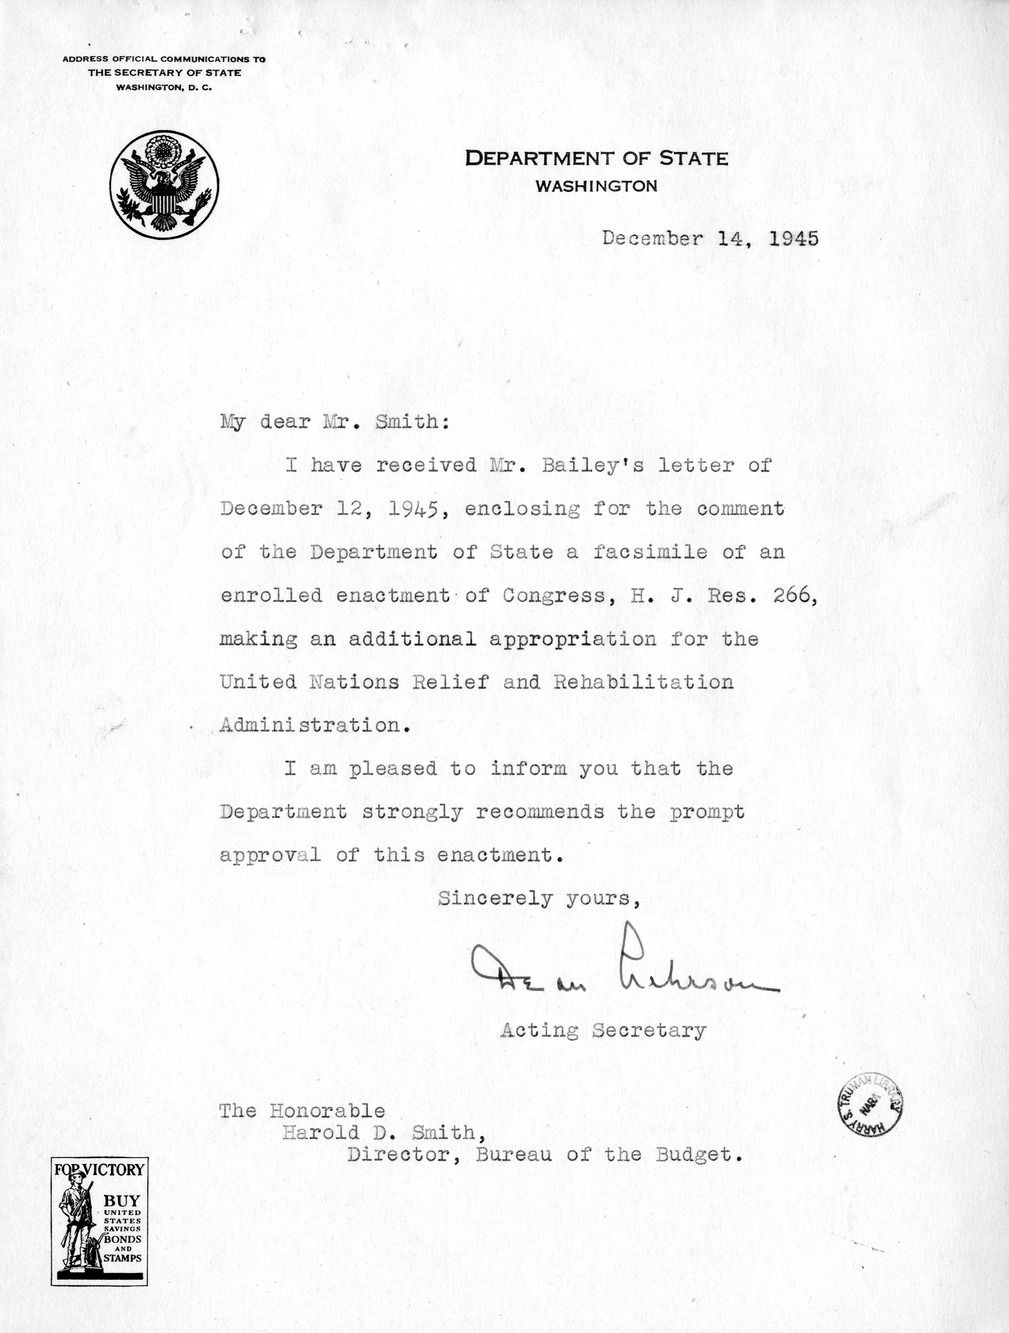 Memorandum from Harold D. Smith to M. C. Latta, H.J. Res. 266, Making an Additional Appropriation for the United Nations Relief and Rehabilitation Administration, with Attachments